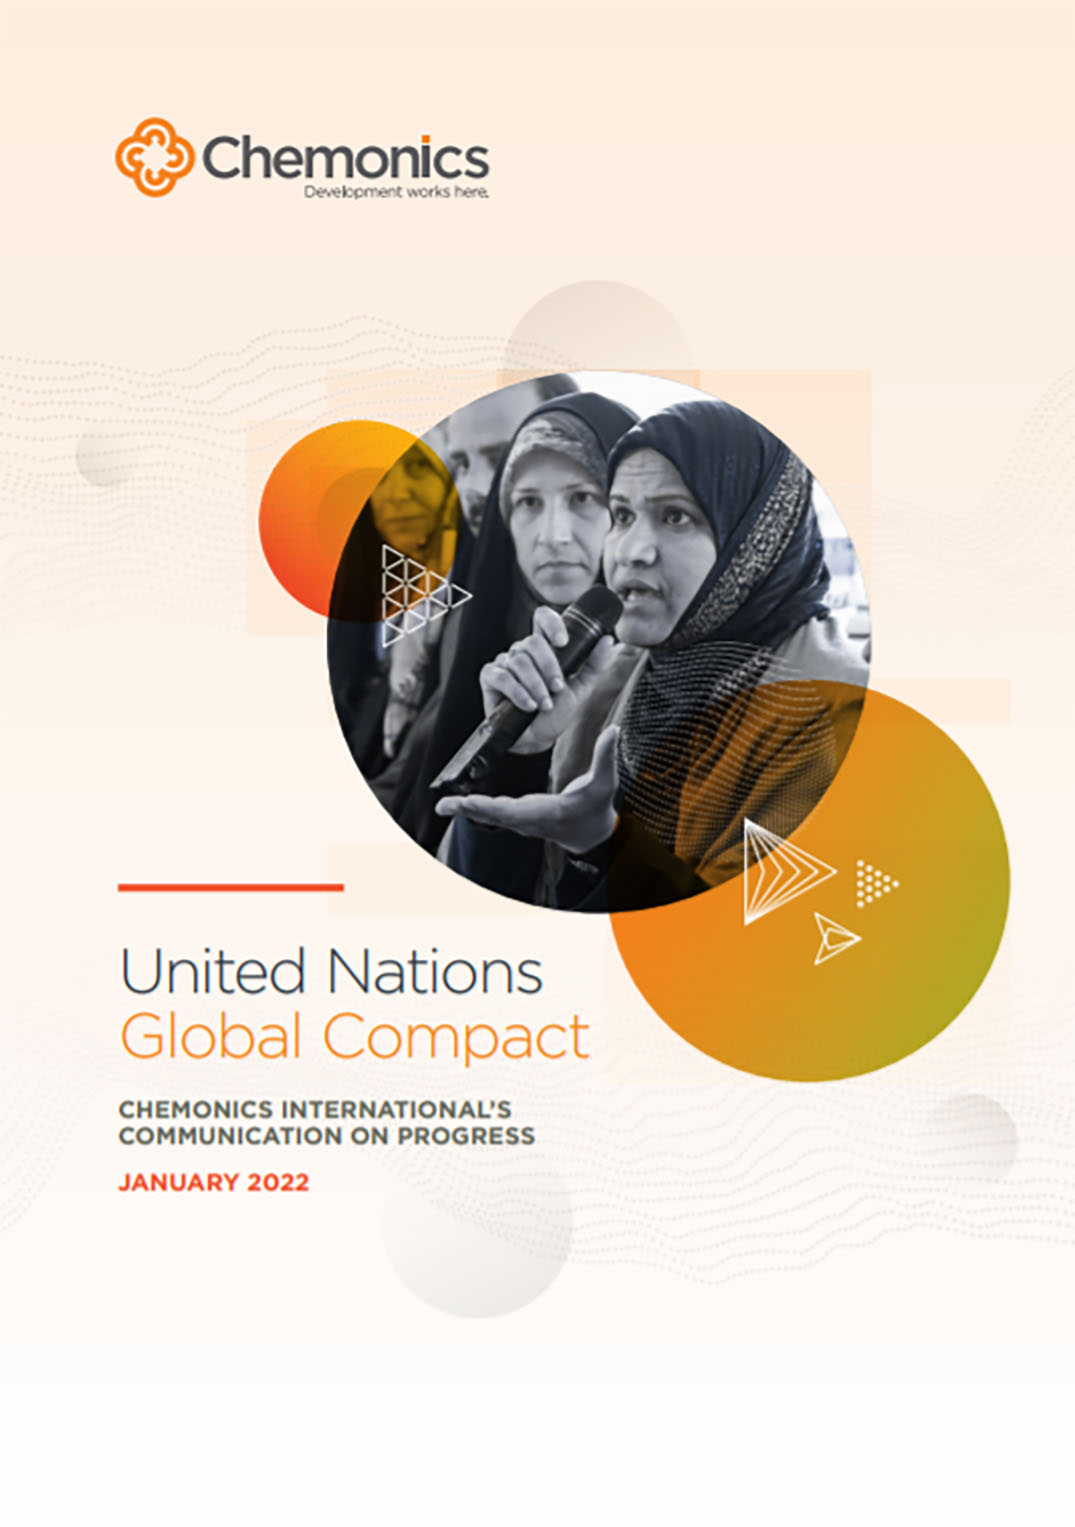 The front page of a report titled "United Nations Global Compact: Chemonics International's Communication on Progress." Includes an image of a woman speaking into a microphone.